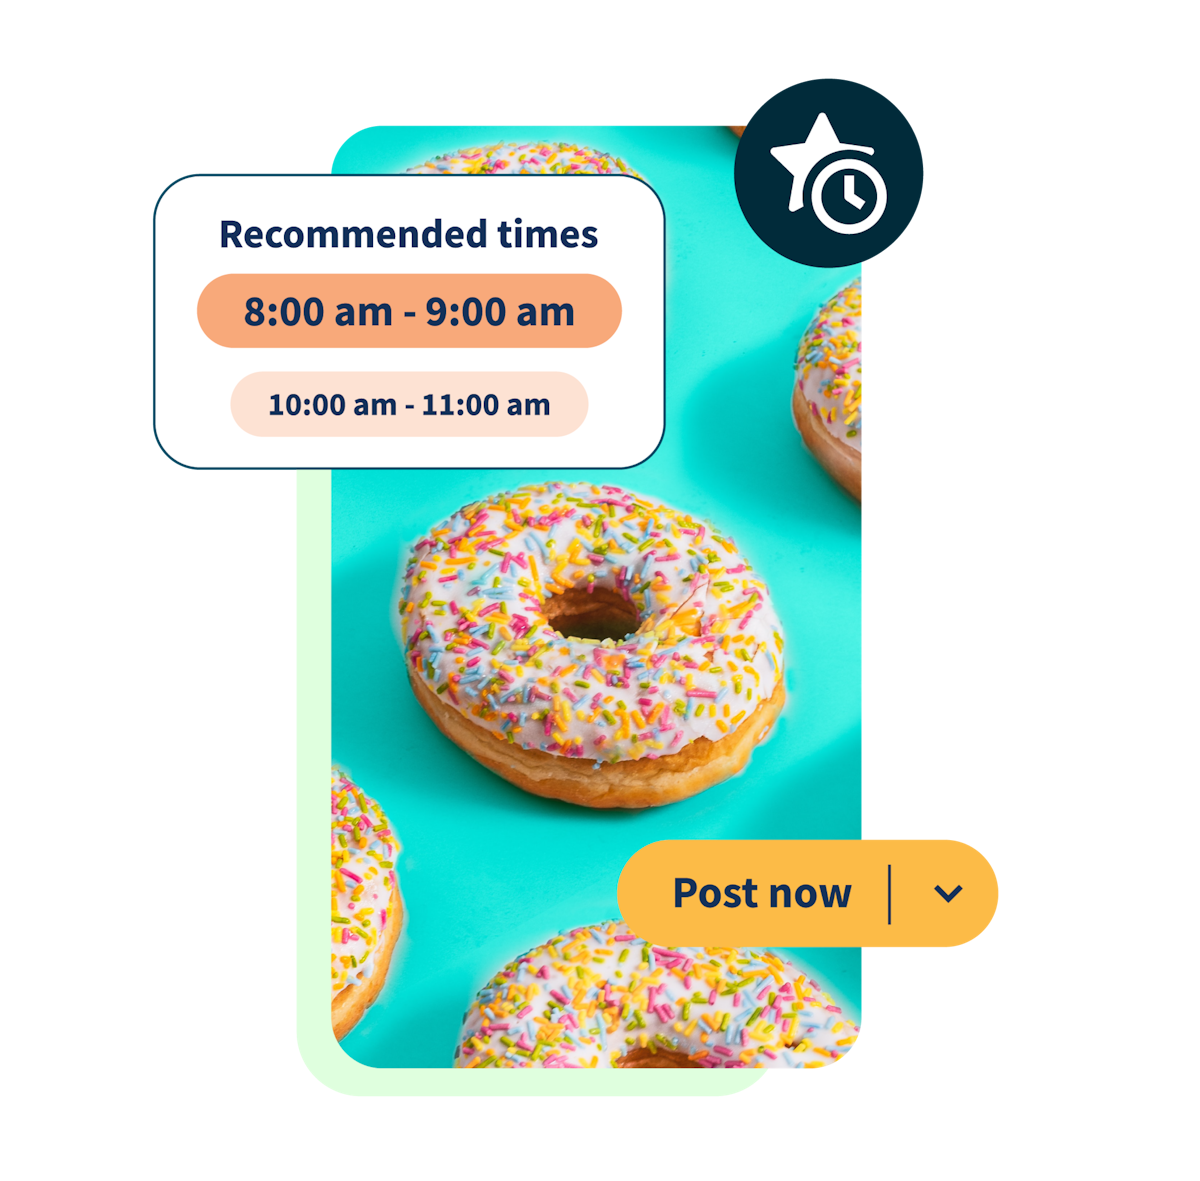 Picture of a donut with "recommended times" and "post now" buttons